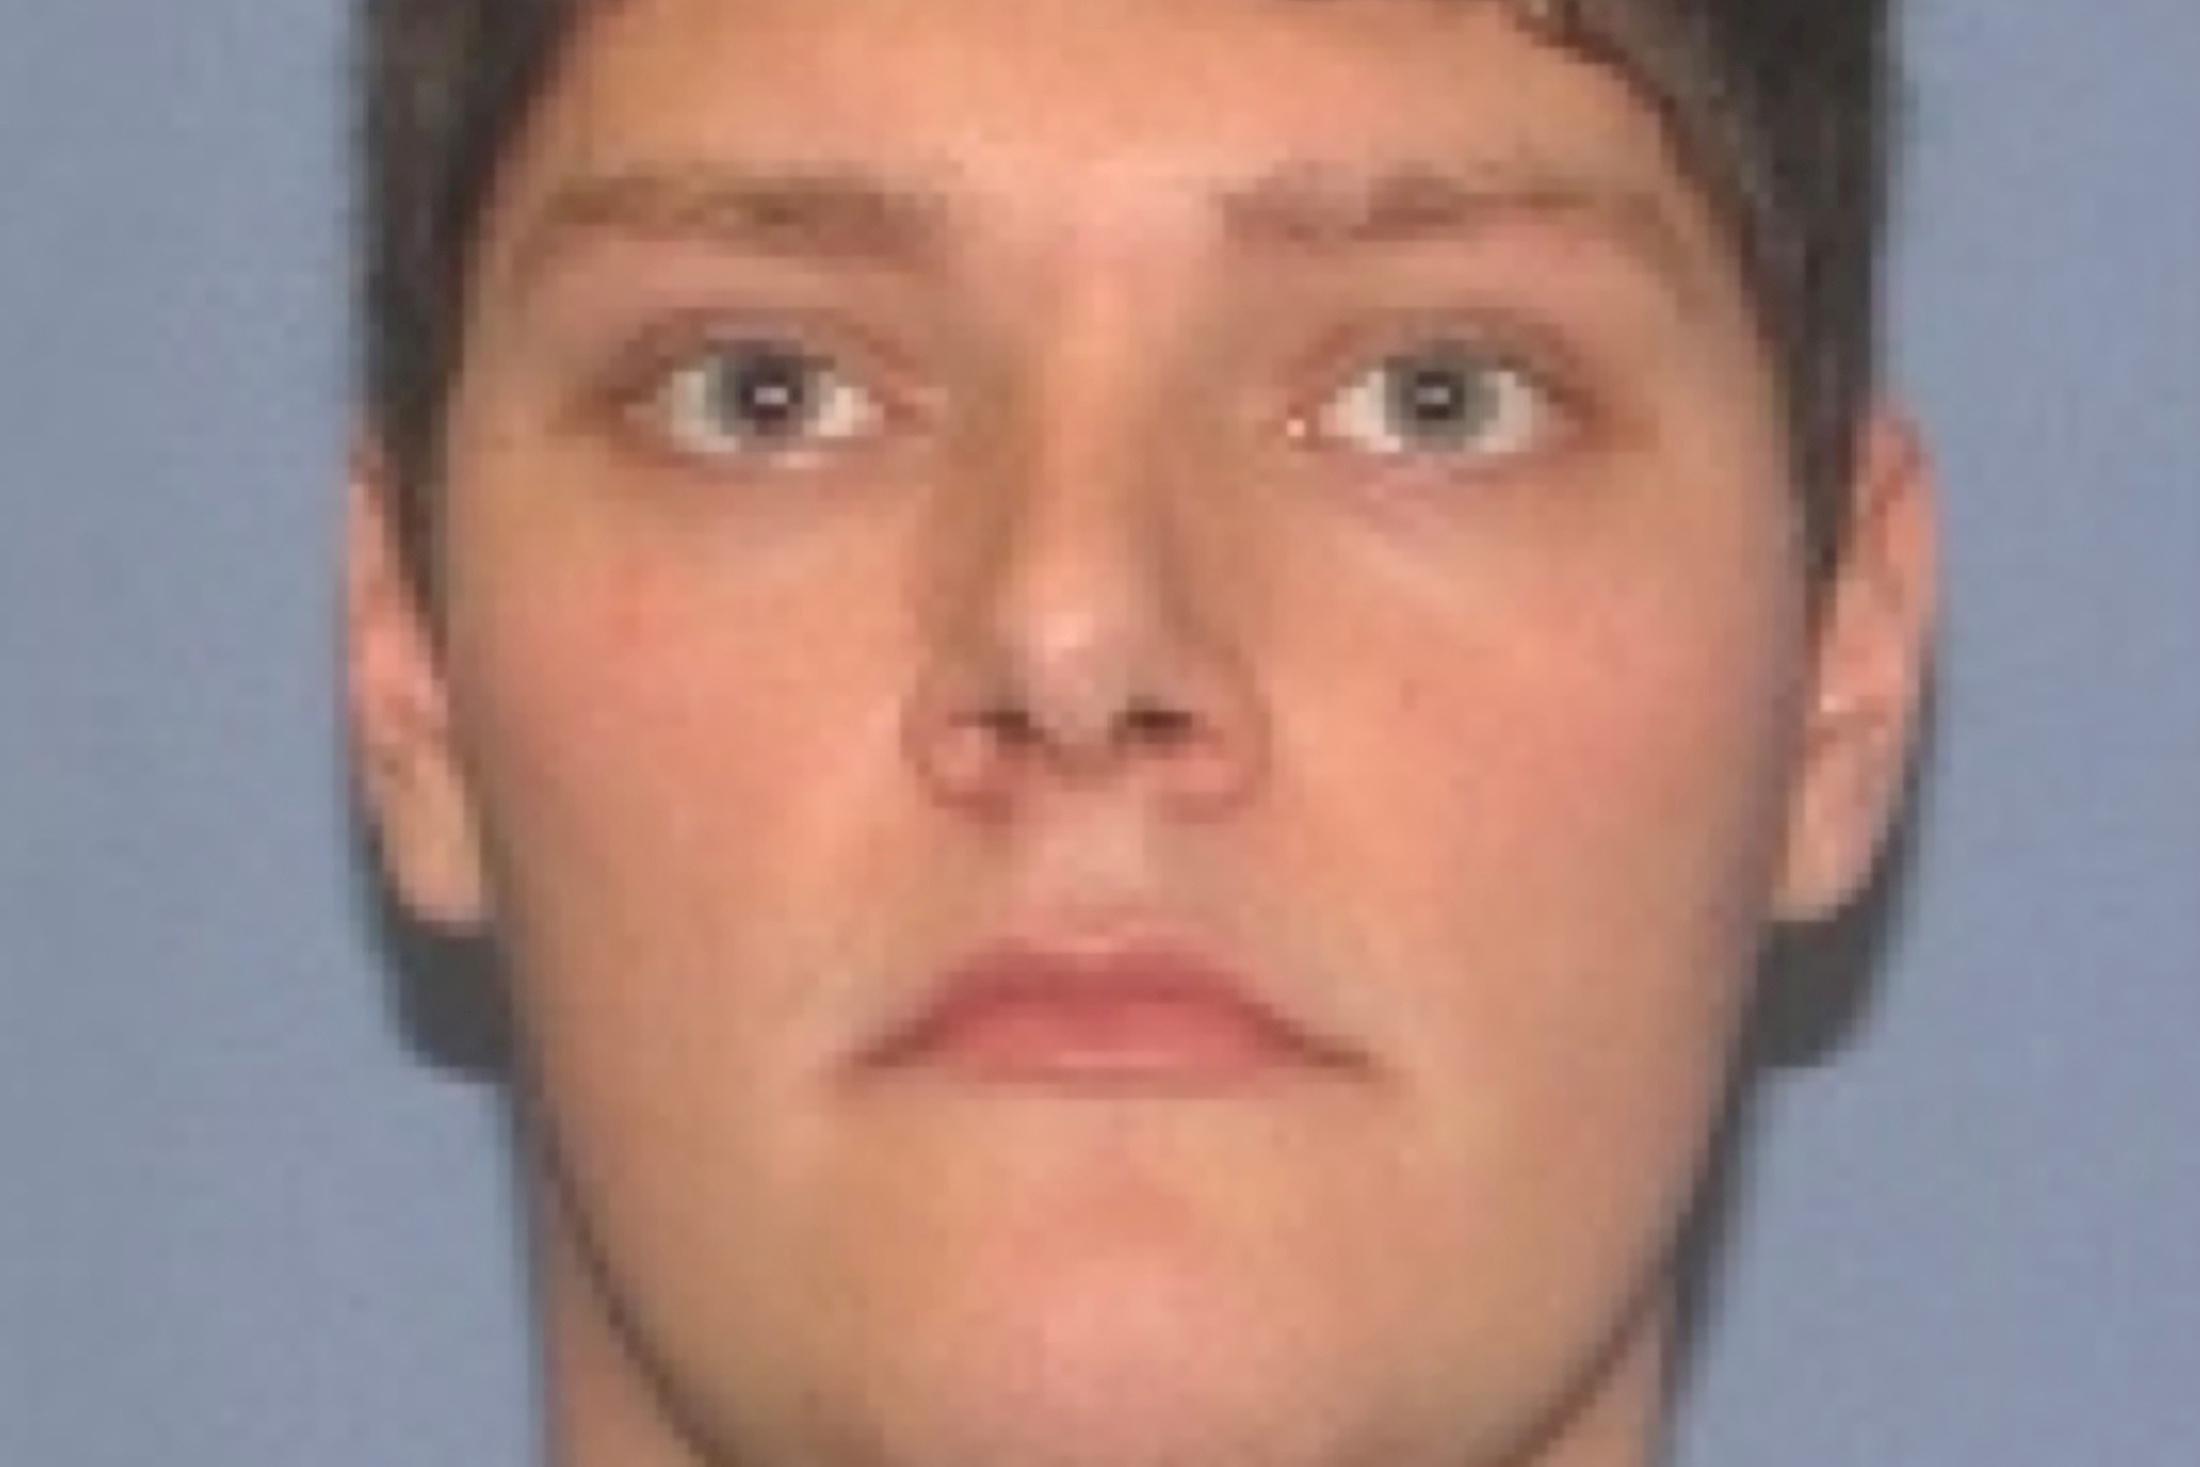 Deceased mass shooting suspect Connor Betts of Bellbrook, Ohio appears in an identity photograph released by police in Dayton, Ohio, U.S. August 4, 2019. Dayton Police Department/Handout via REUTERS